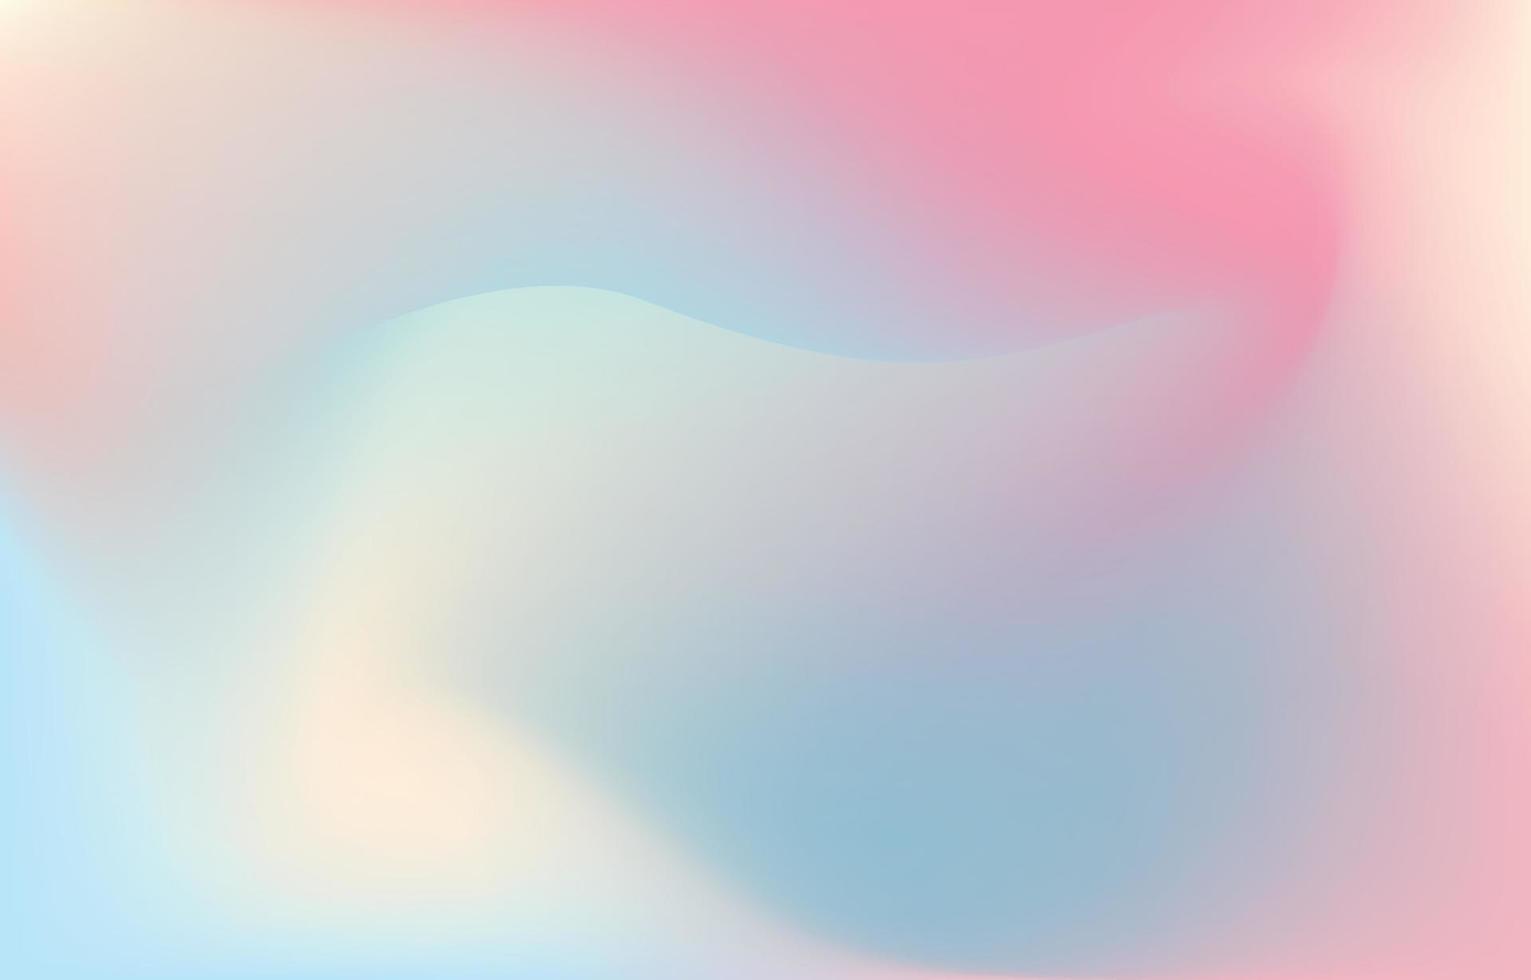 Abstract Pastel Colorful Gradient Background Concept vector